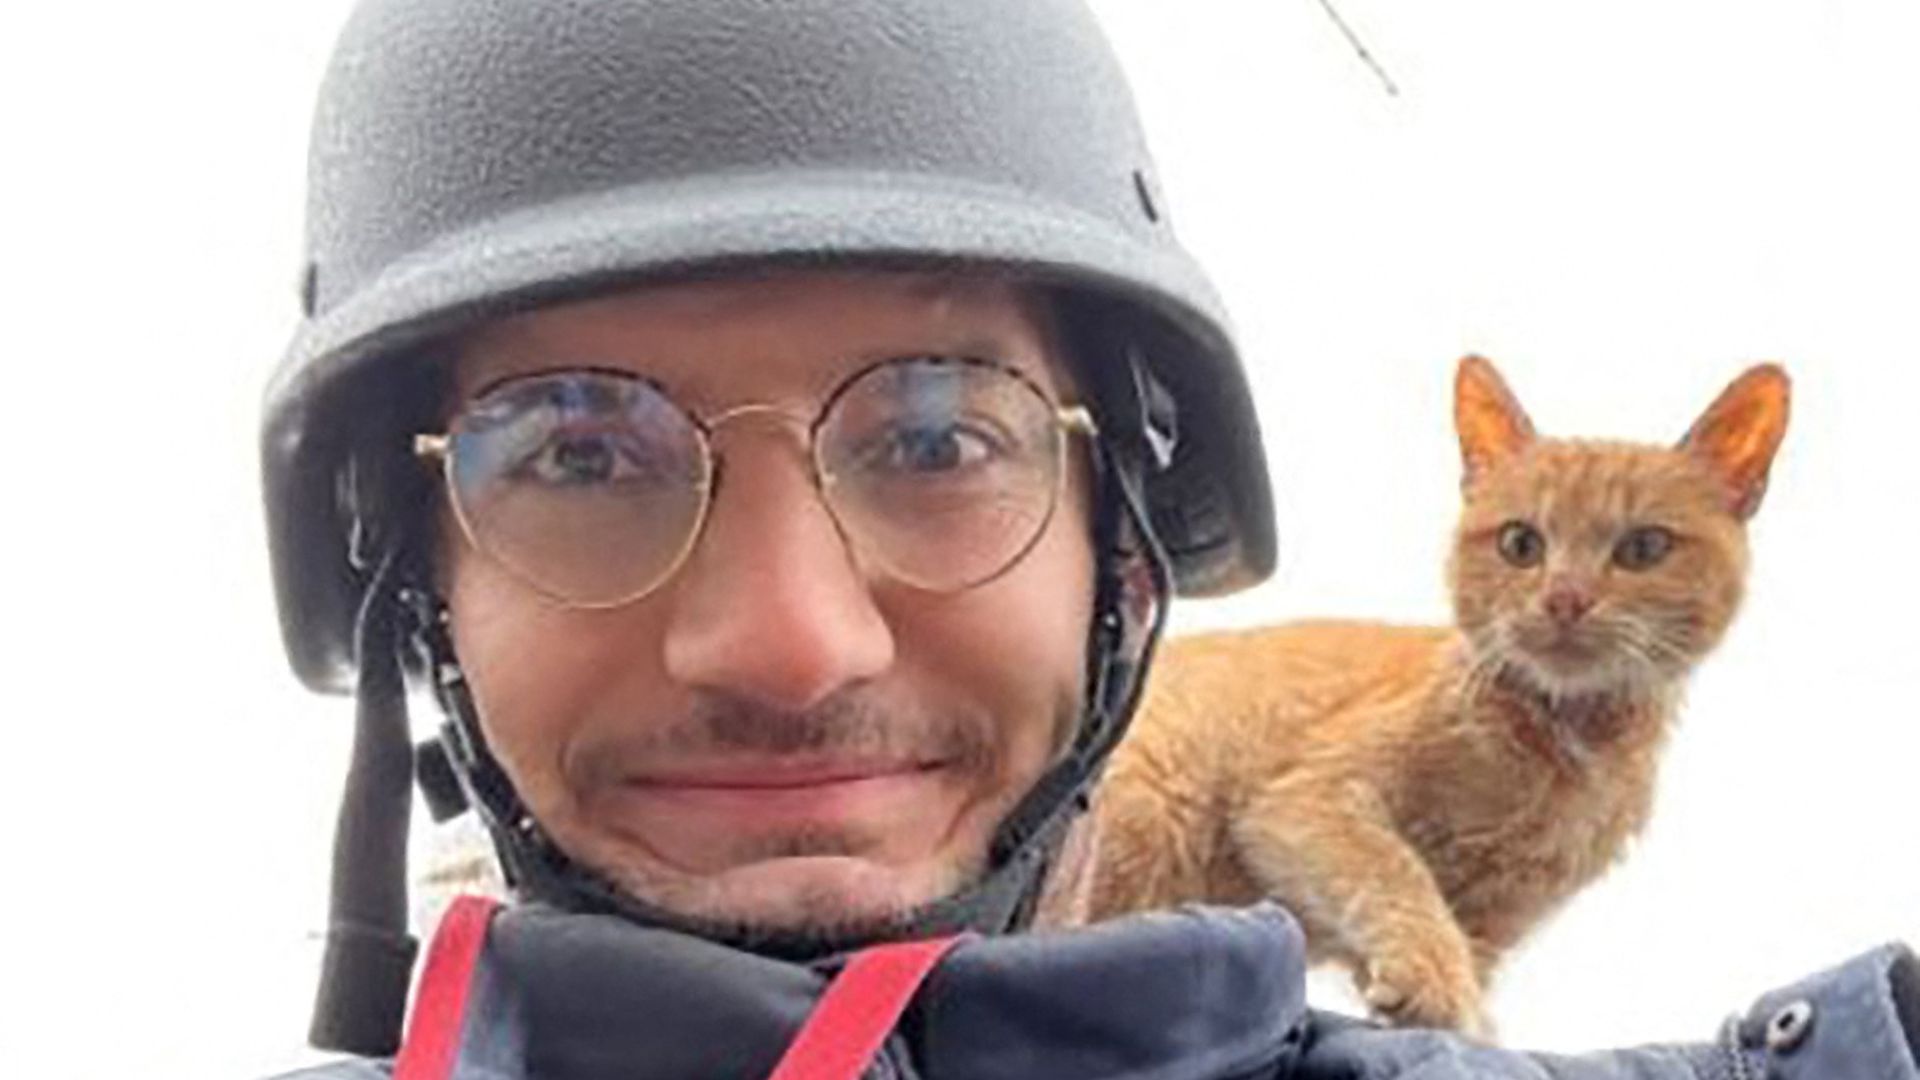 AFP journalist Arman Soldin snaps a selfie with a cat on his shoulder during an assignment for AFP in Ukraine. 